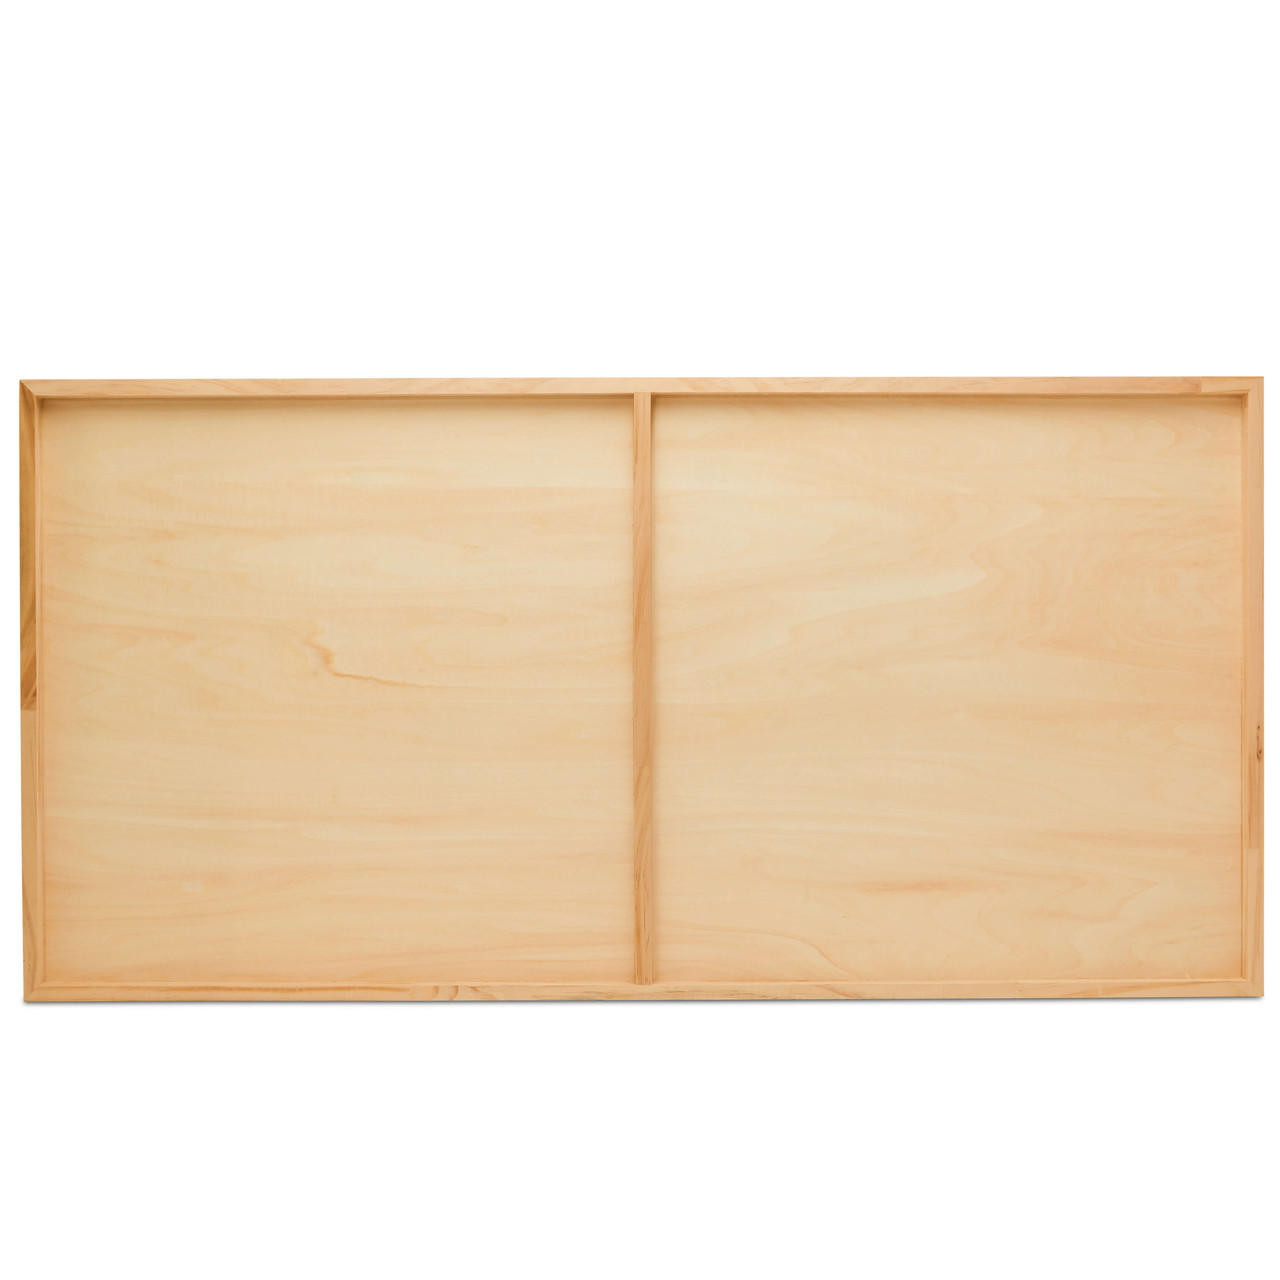 Birch Painting Panel 14 x 18 x 3/4-inch, Pack of 2 Wood Canvas Boards for  Painting, Blank Signs for Crafts, by Woodpeckers 